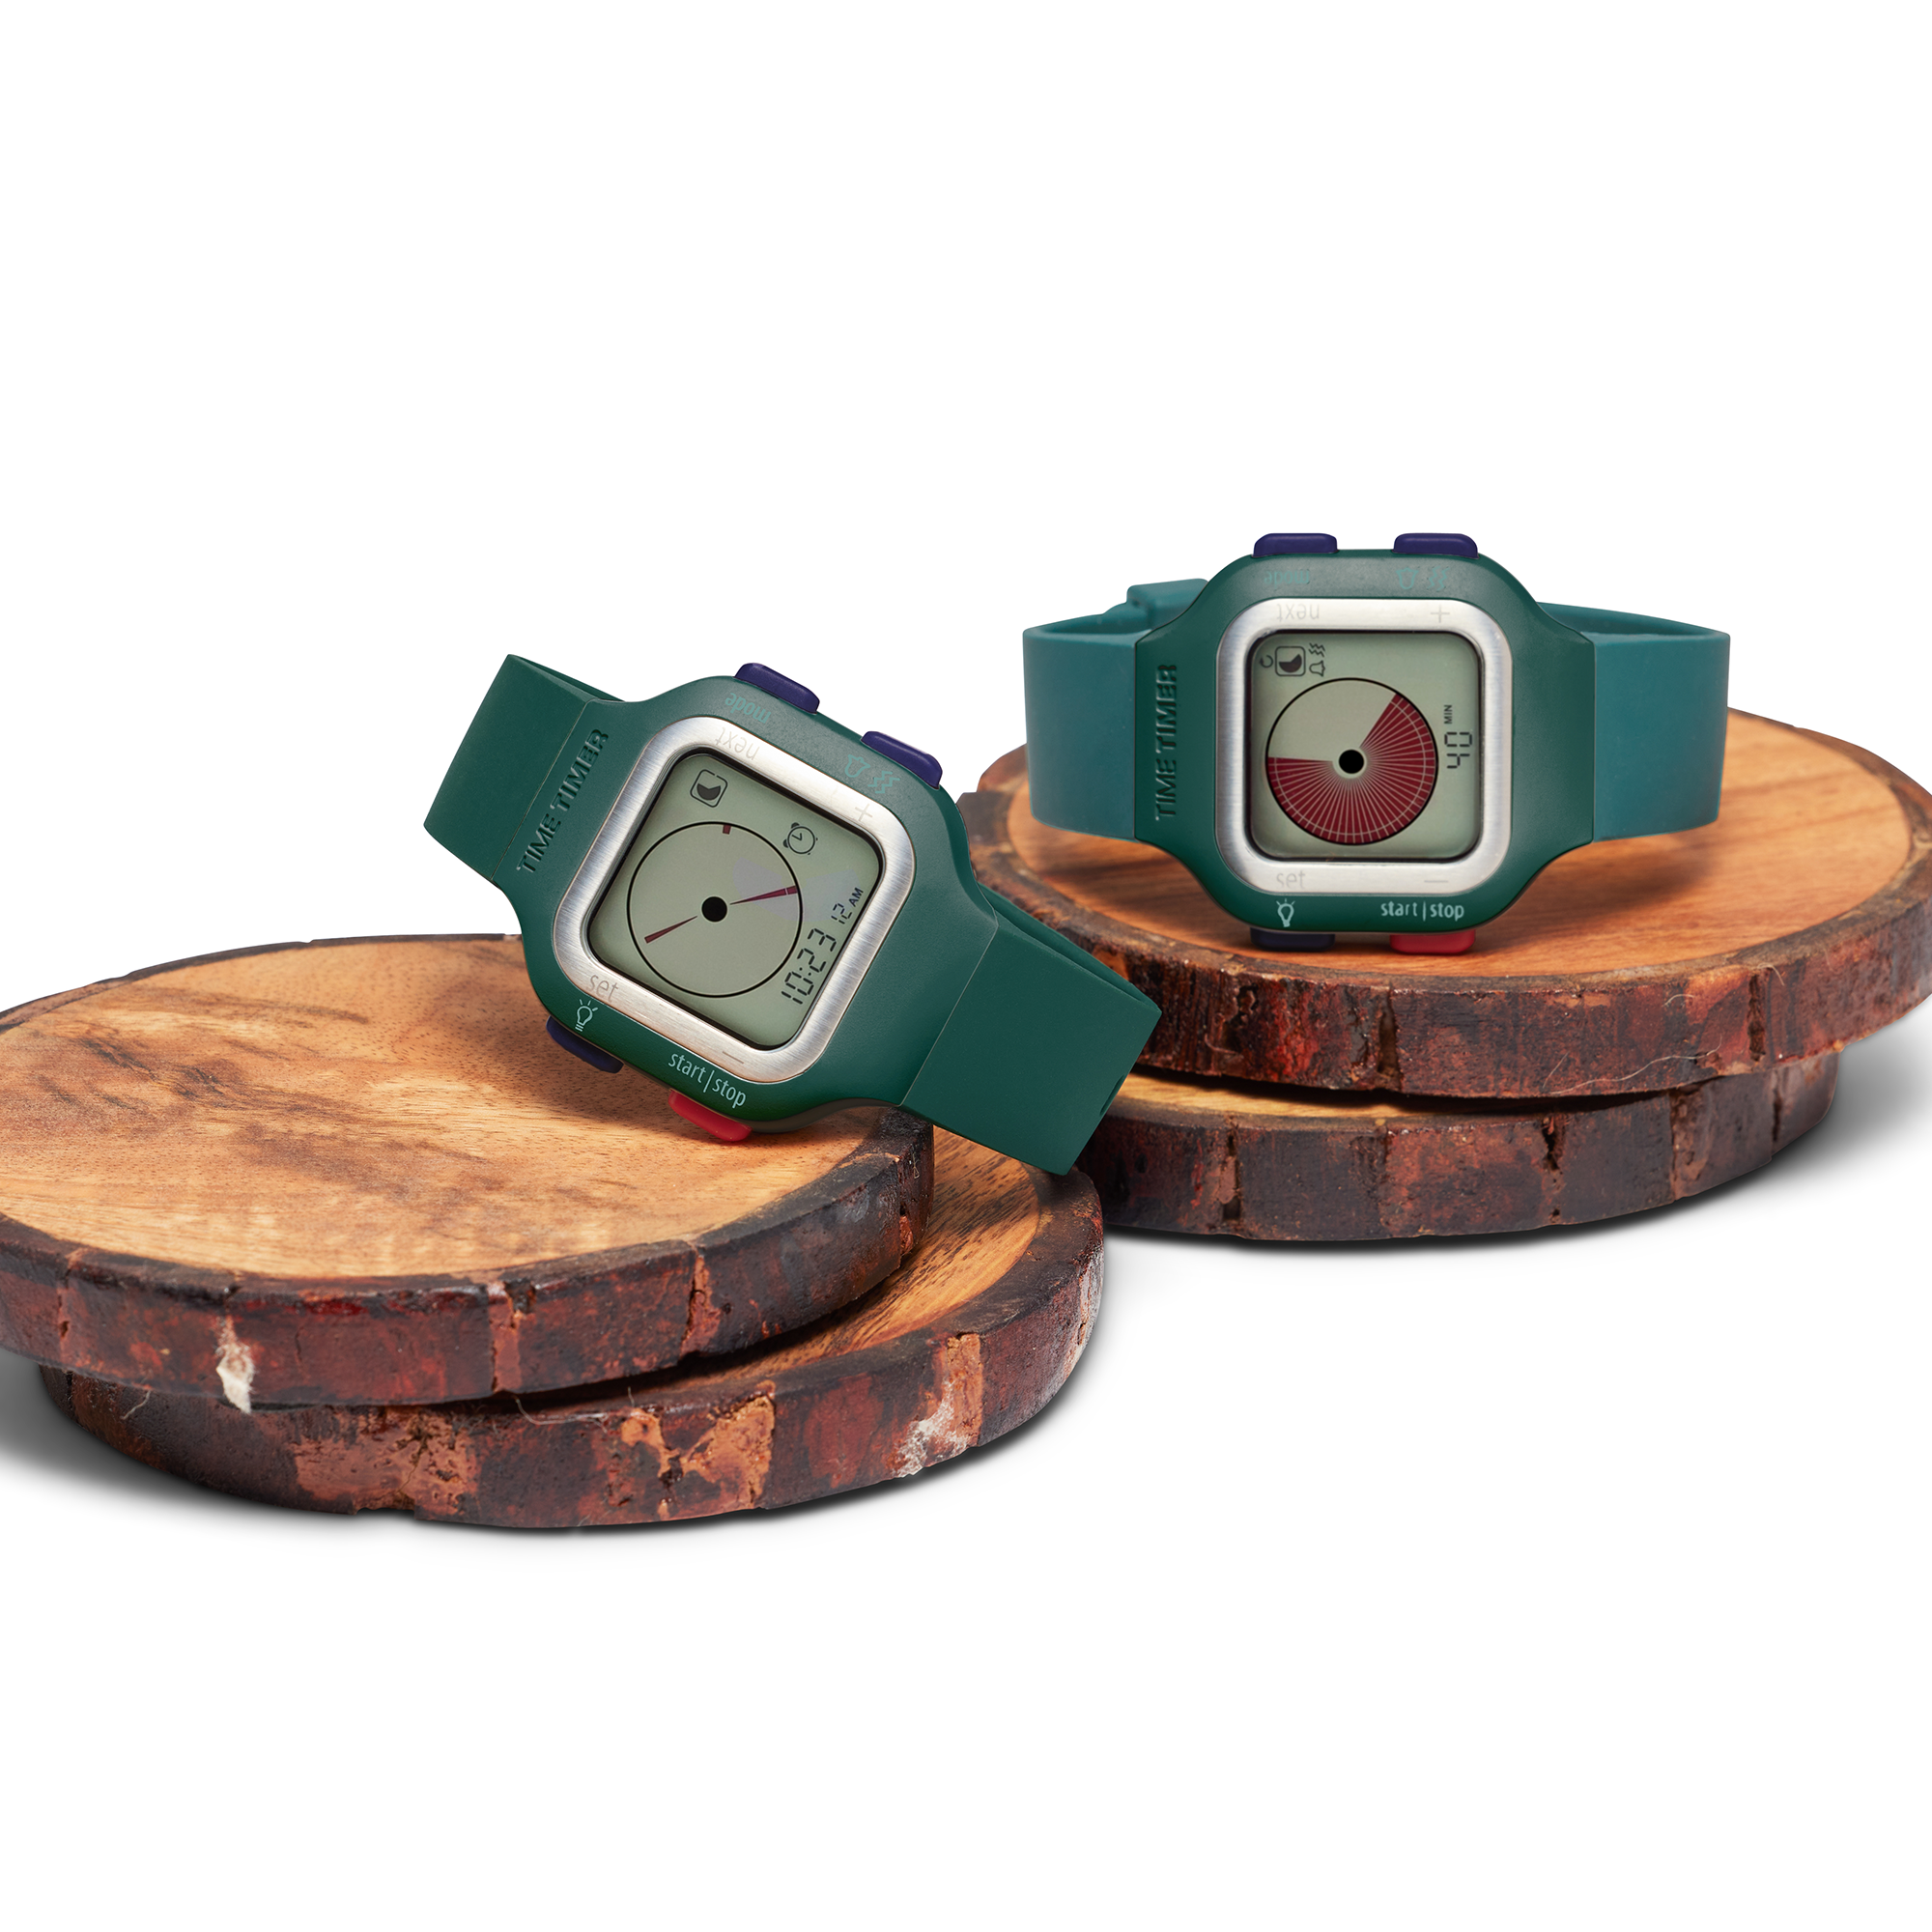 Time Timer® Watch Accessory - Extra Watch Band Accessory shown in the Sequoia Green watch face. The fist watch shows the standard matching bands. The second watch shows the Sequoia Green face paired with the Baltic Blue band accessory.  